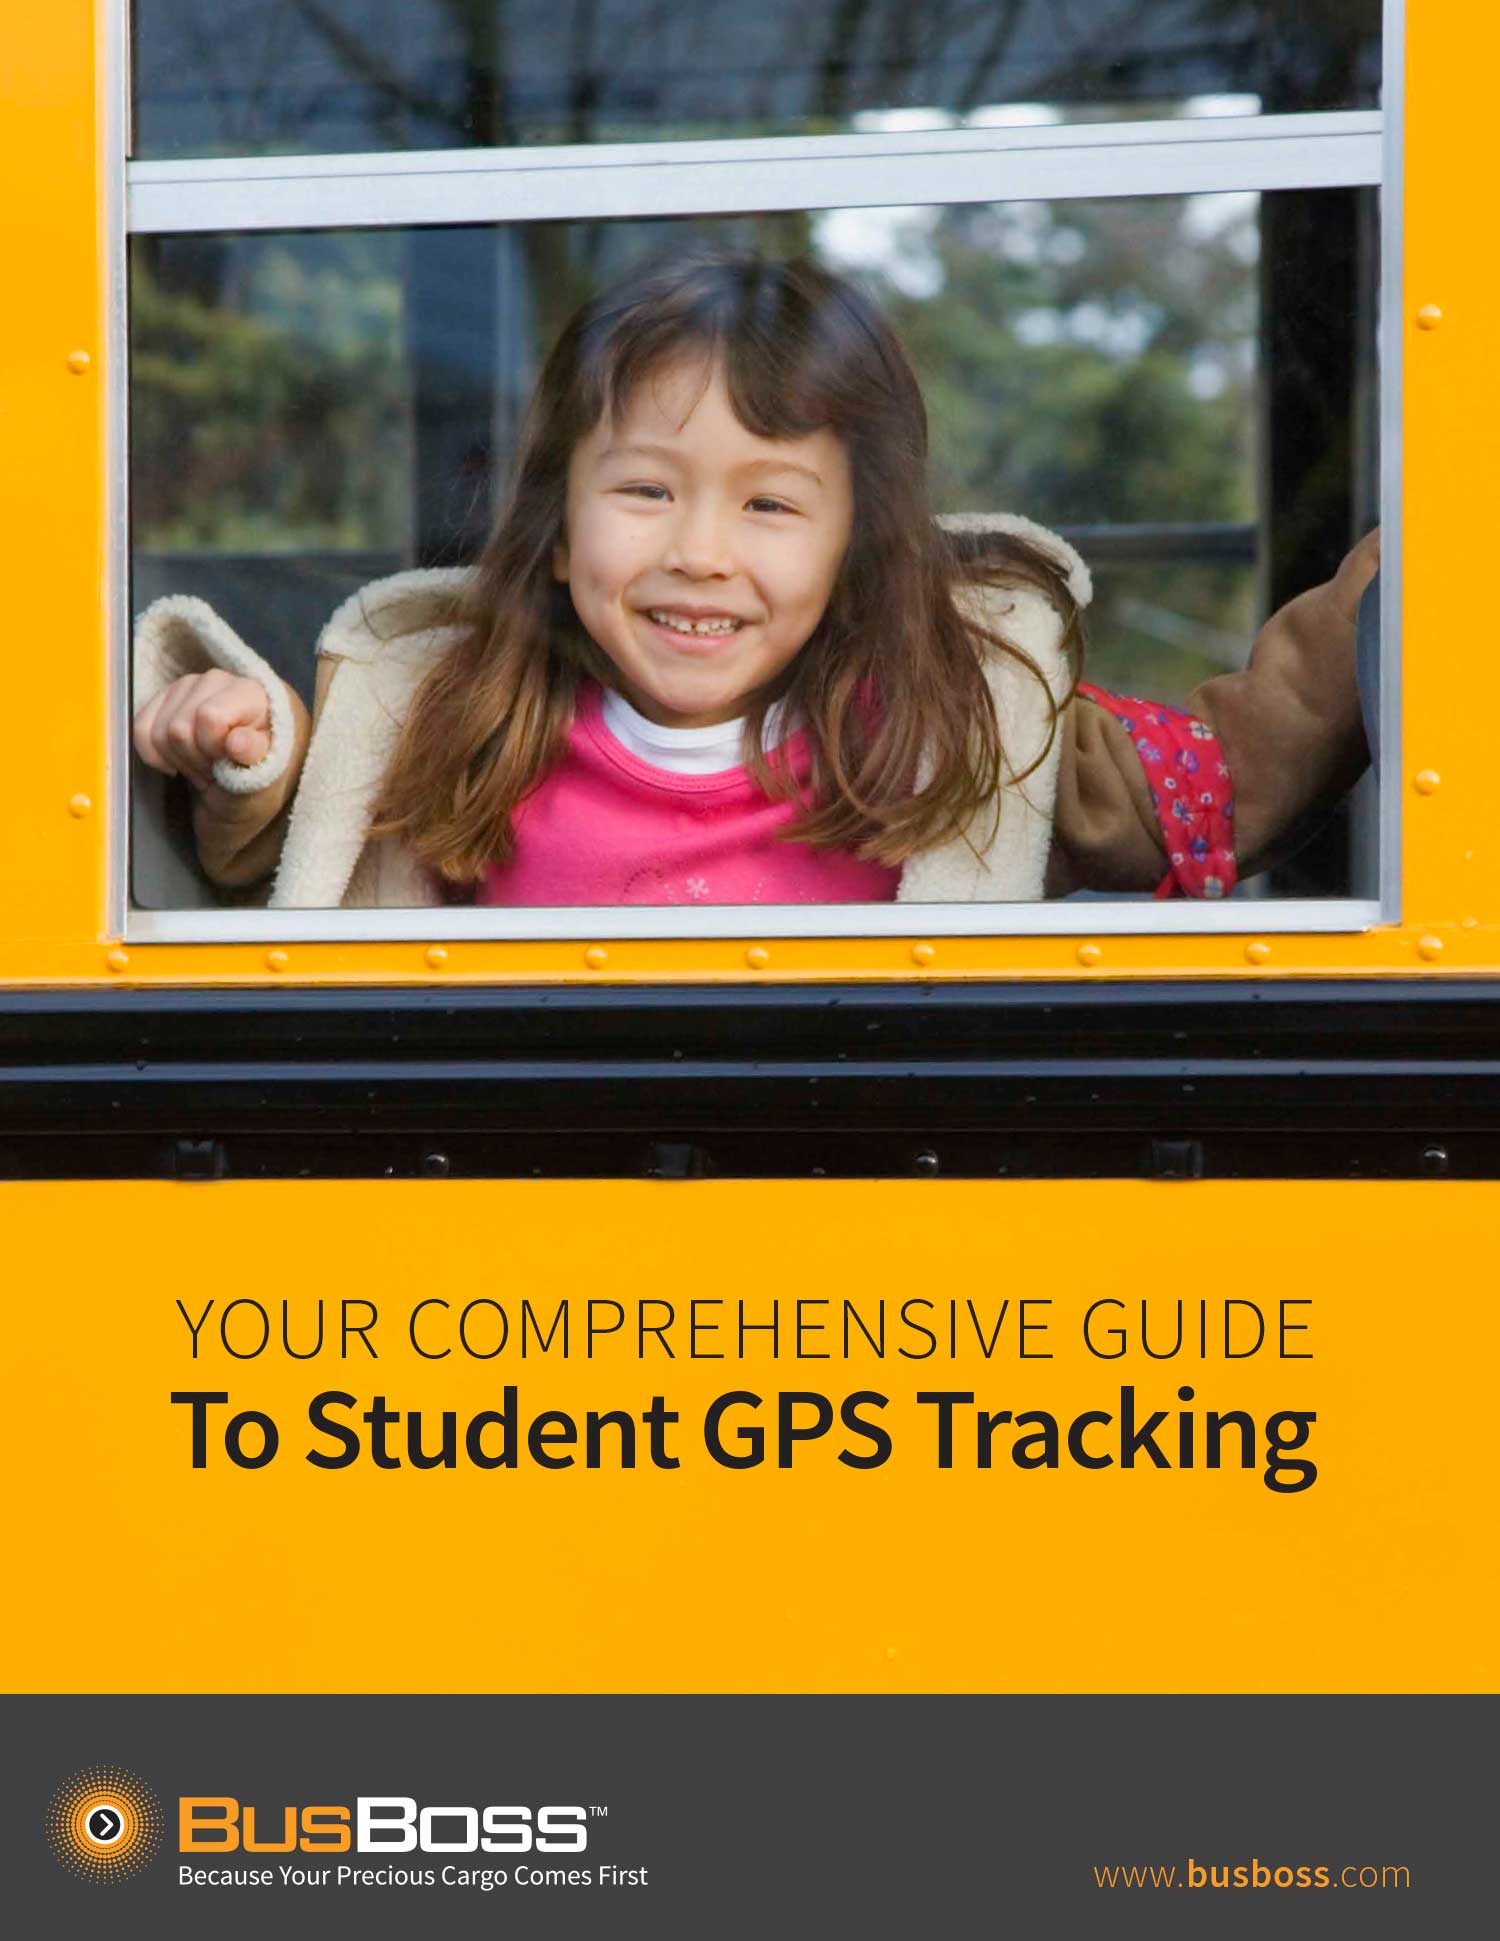 Student GPS Tracking